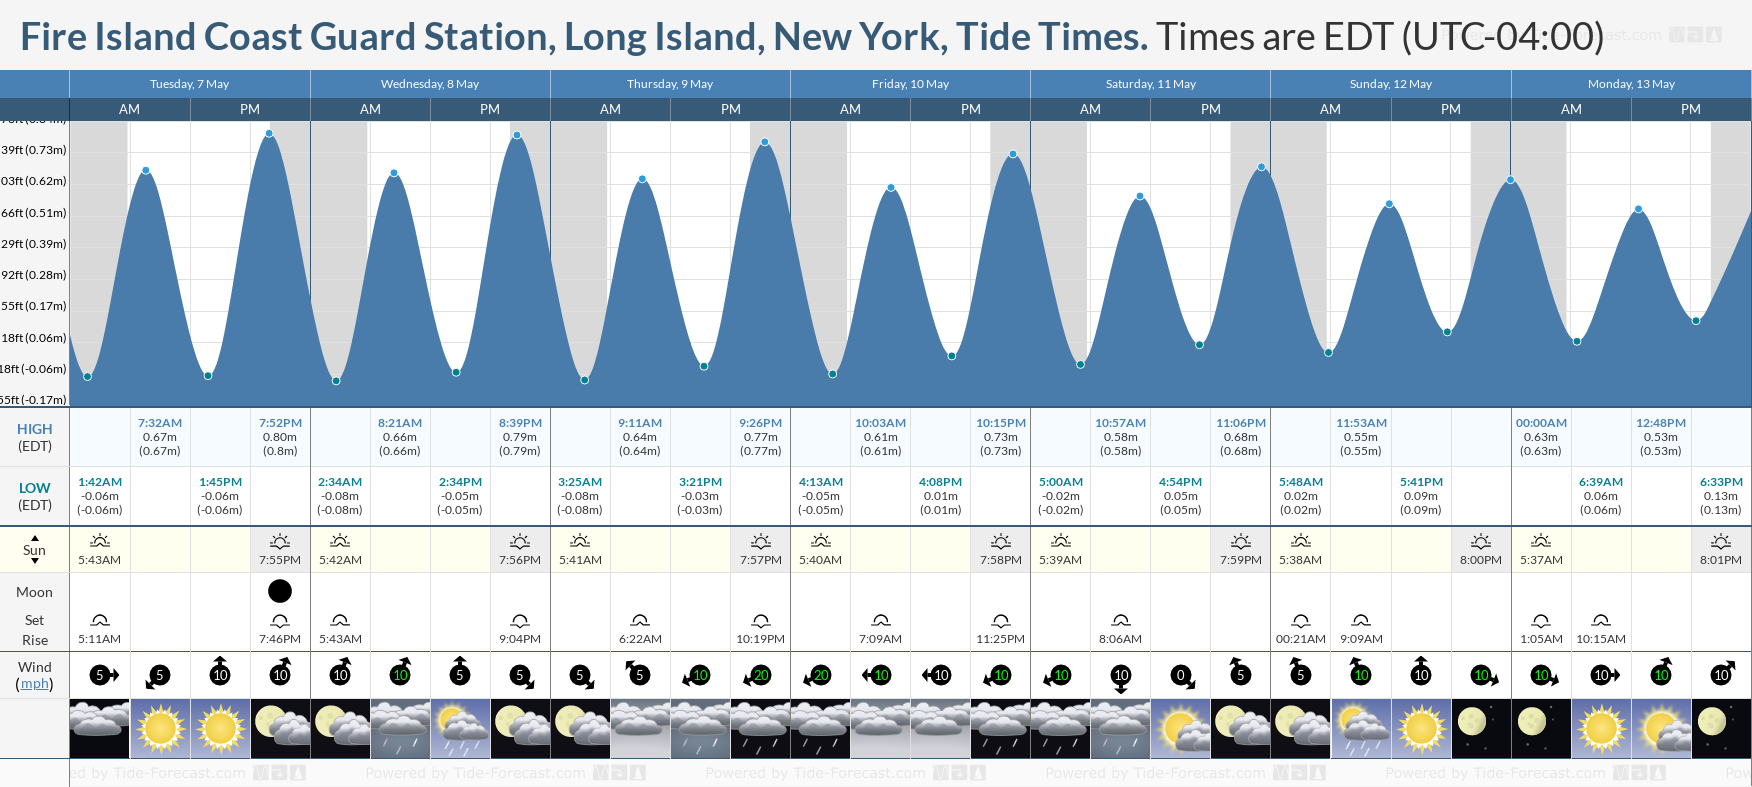 Fire Island Coast Guard Station, Long Island, New York Tide Chart including high and low tide times for the next 7 days